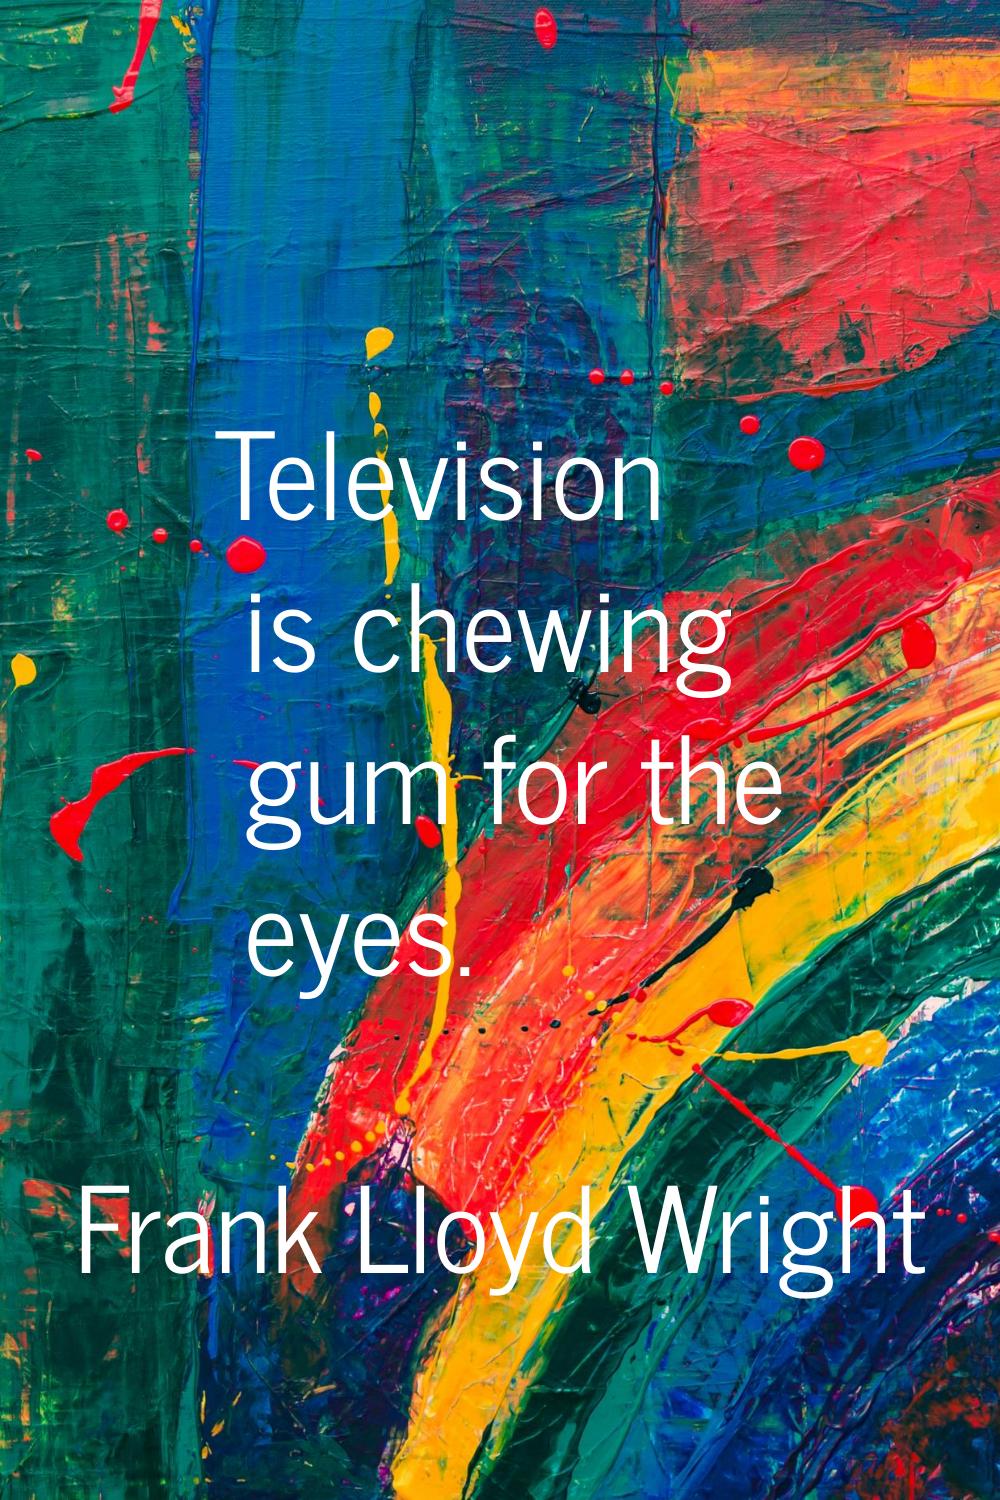 Television is chewing gum for the eyes.